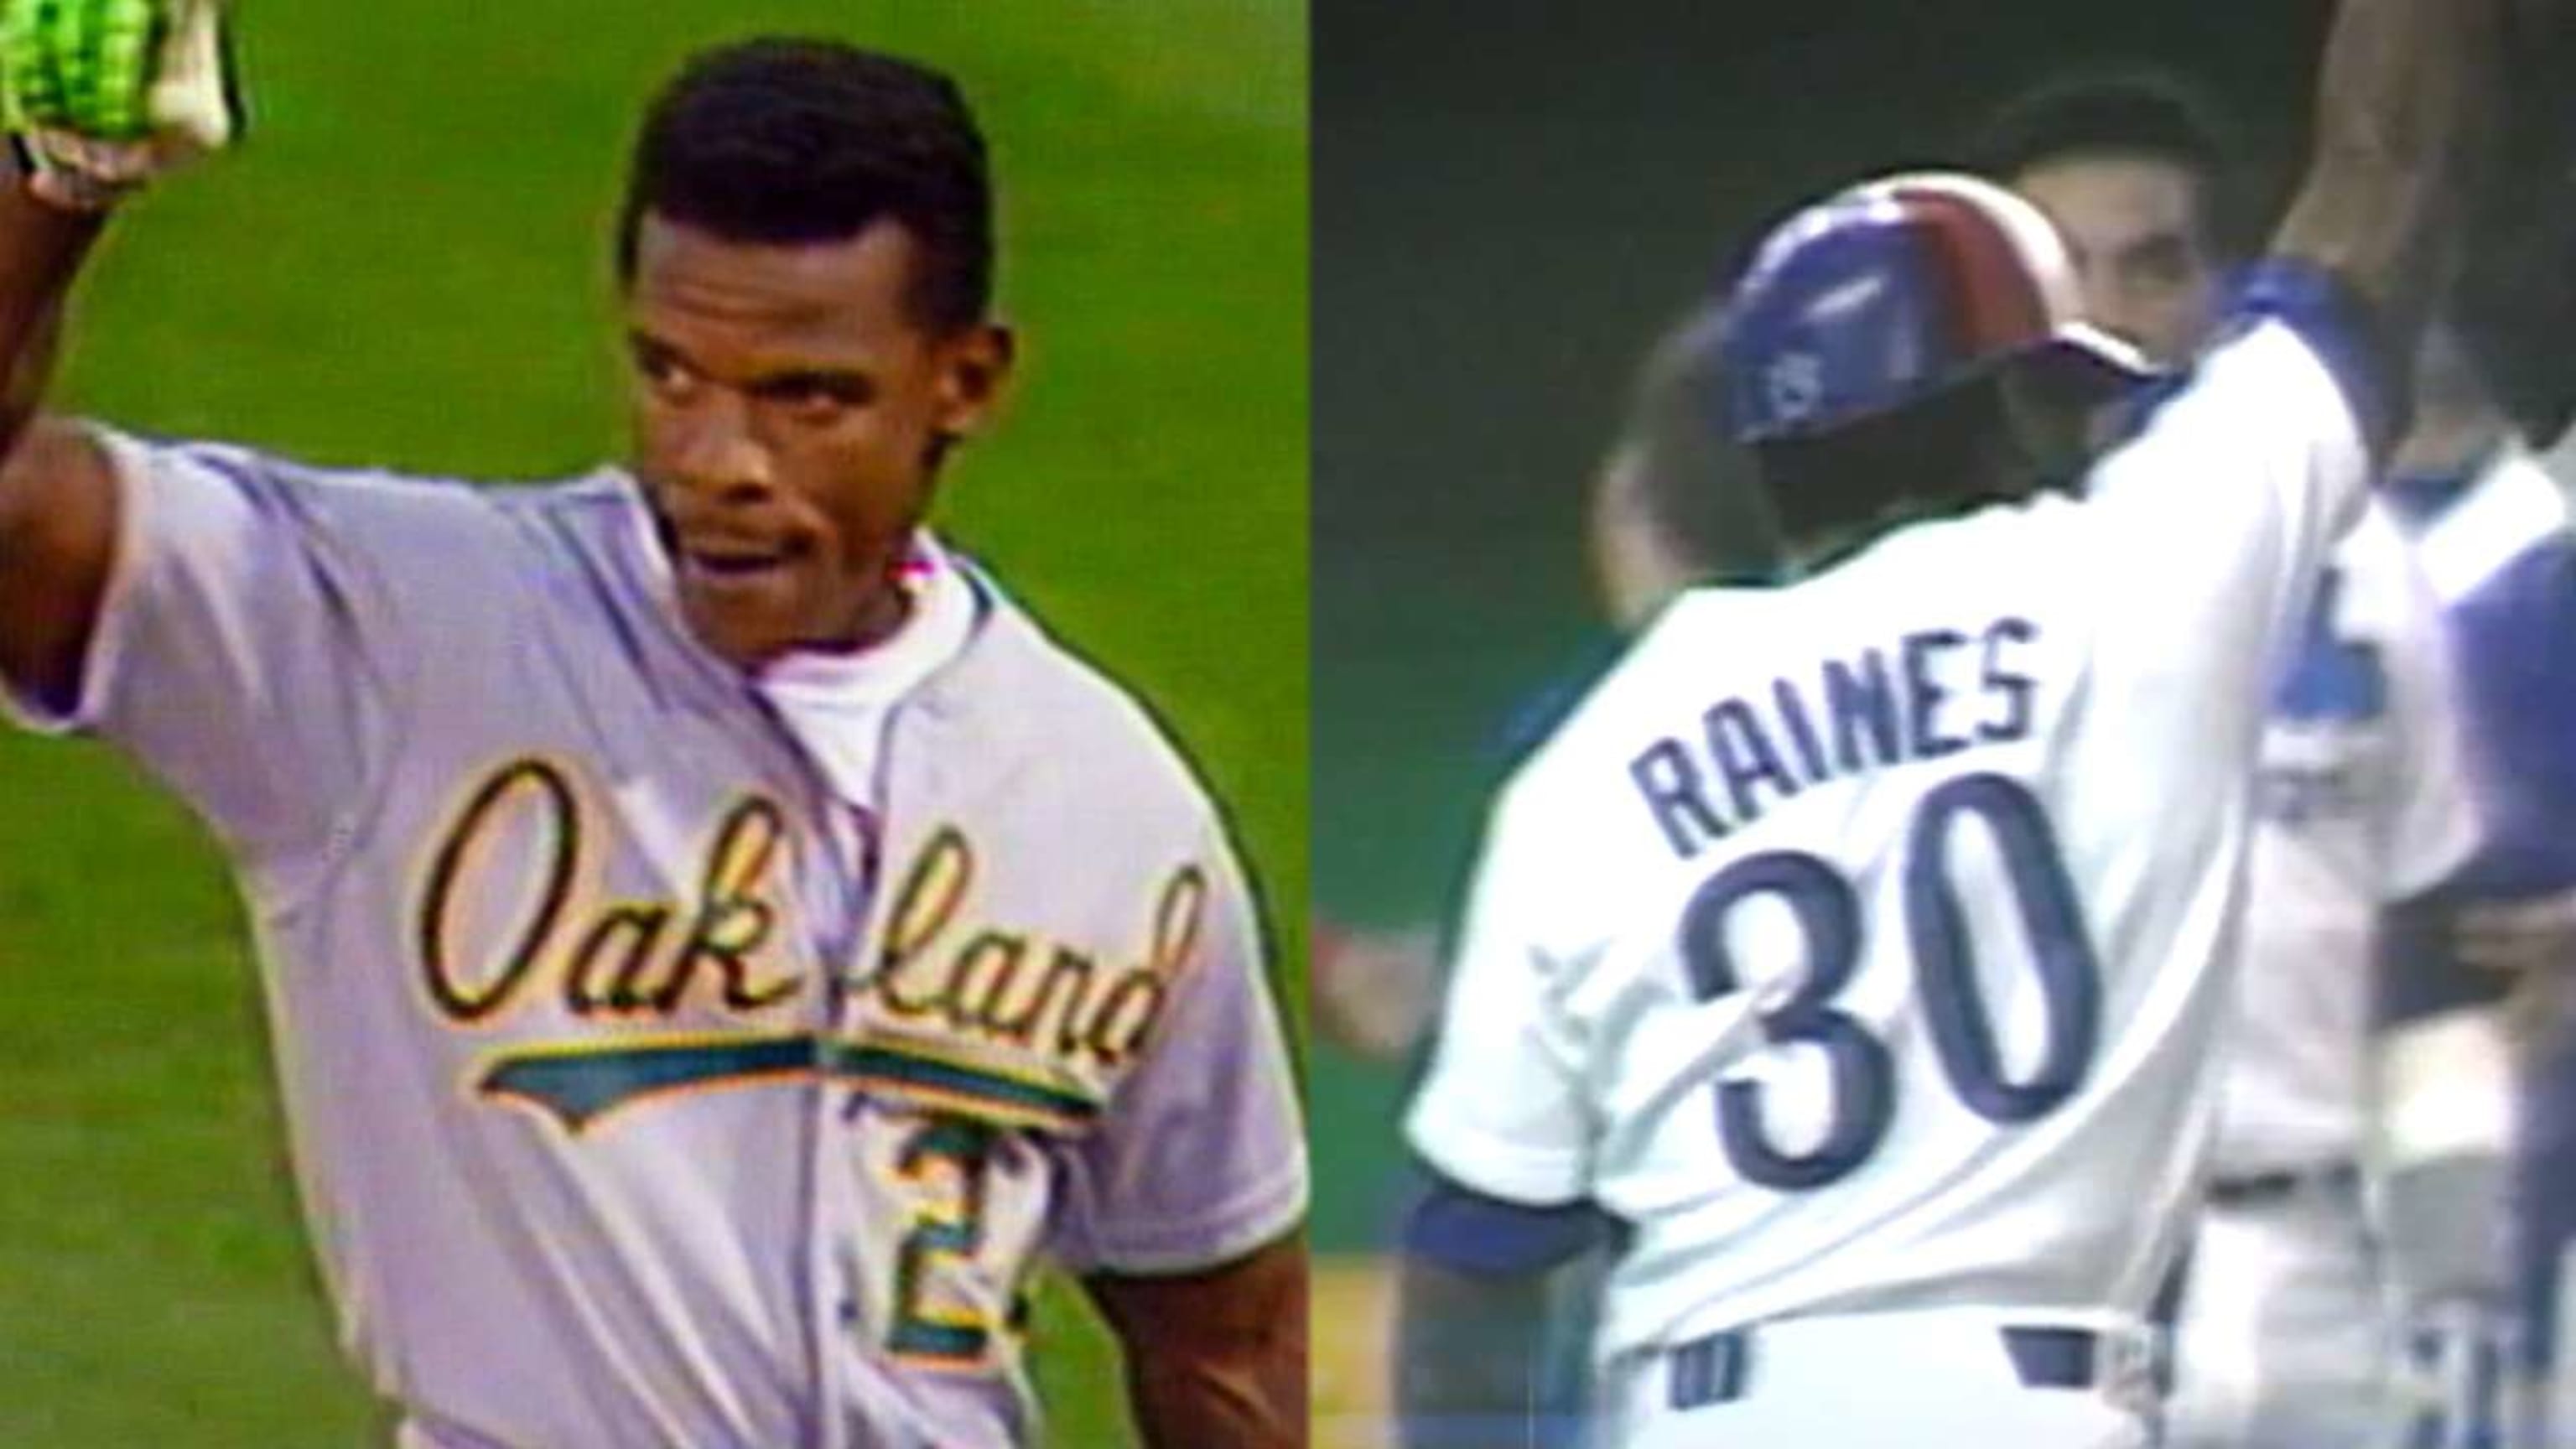 Remember: Rickey Henderson Steals Base In MLB Debut With Oakland A's